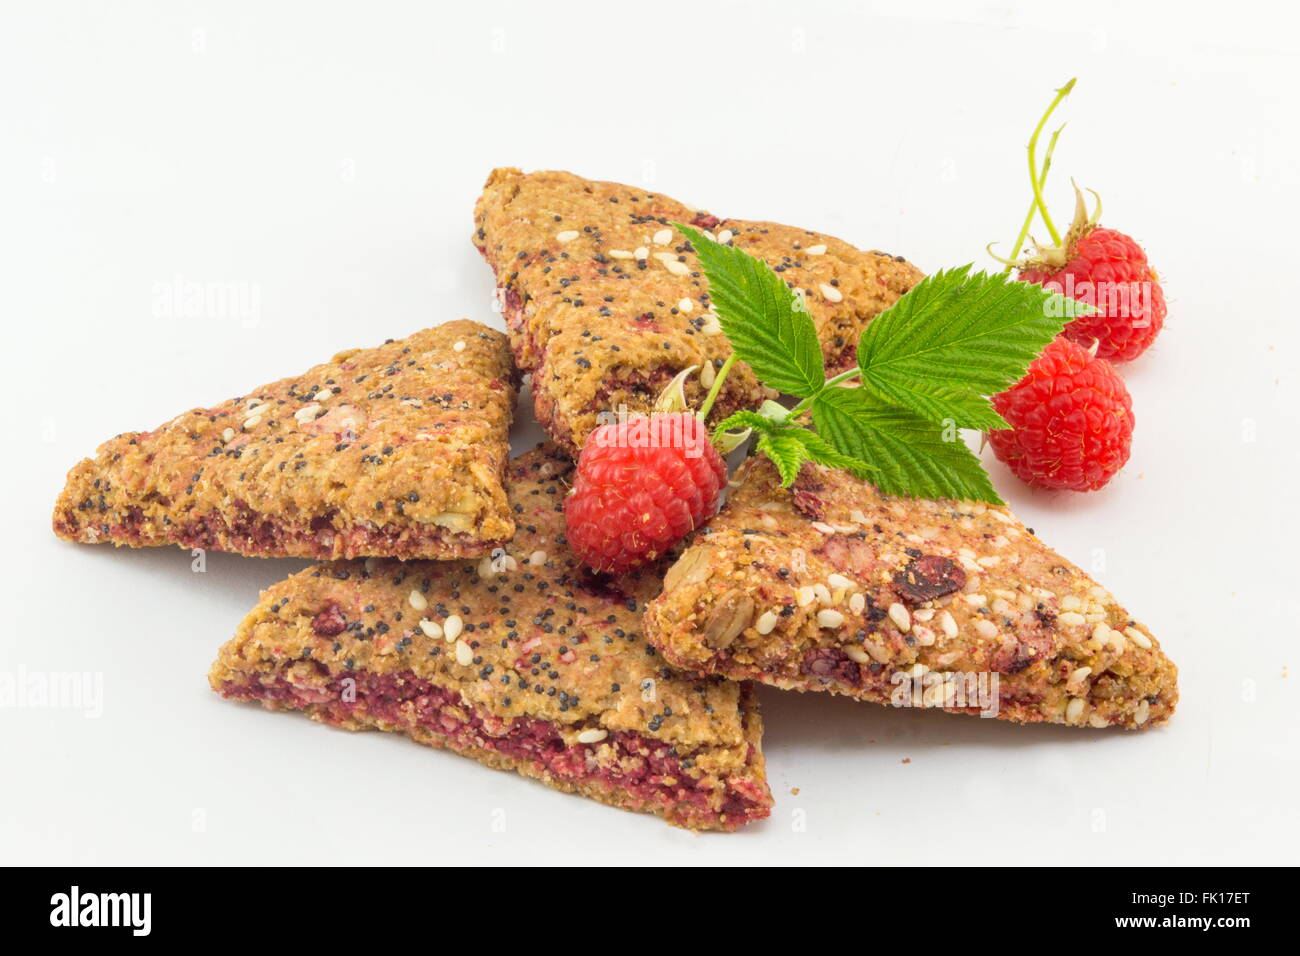 Integral biscuits with fresh red raspberry fruit Stock Photo